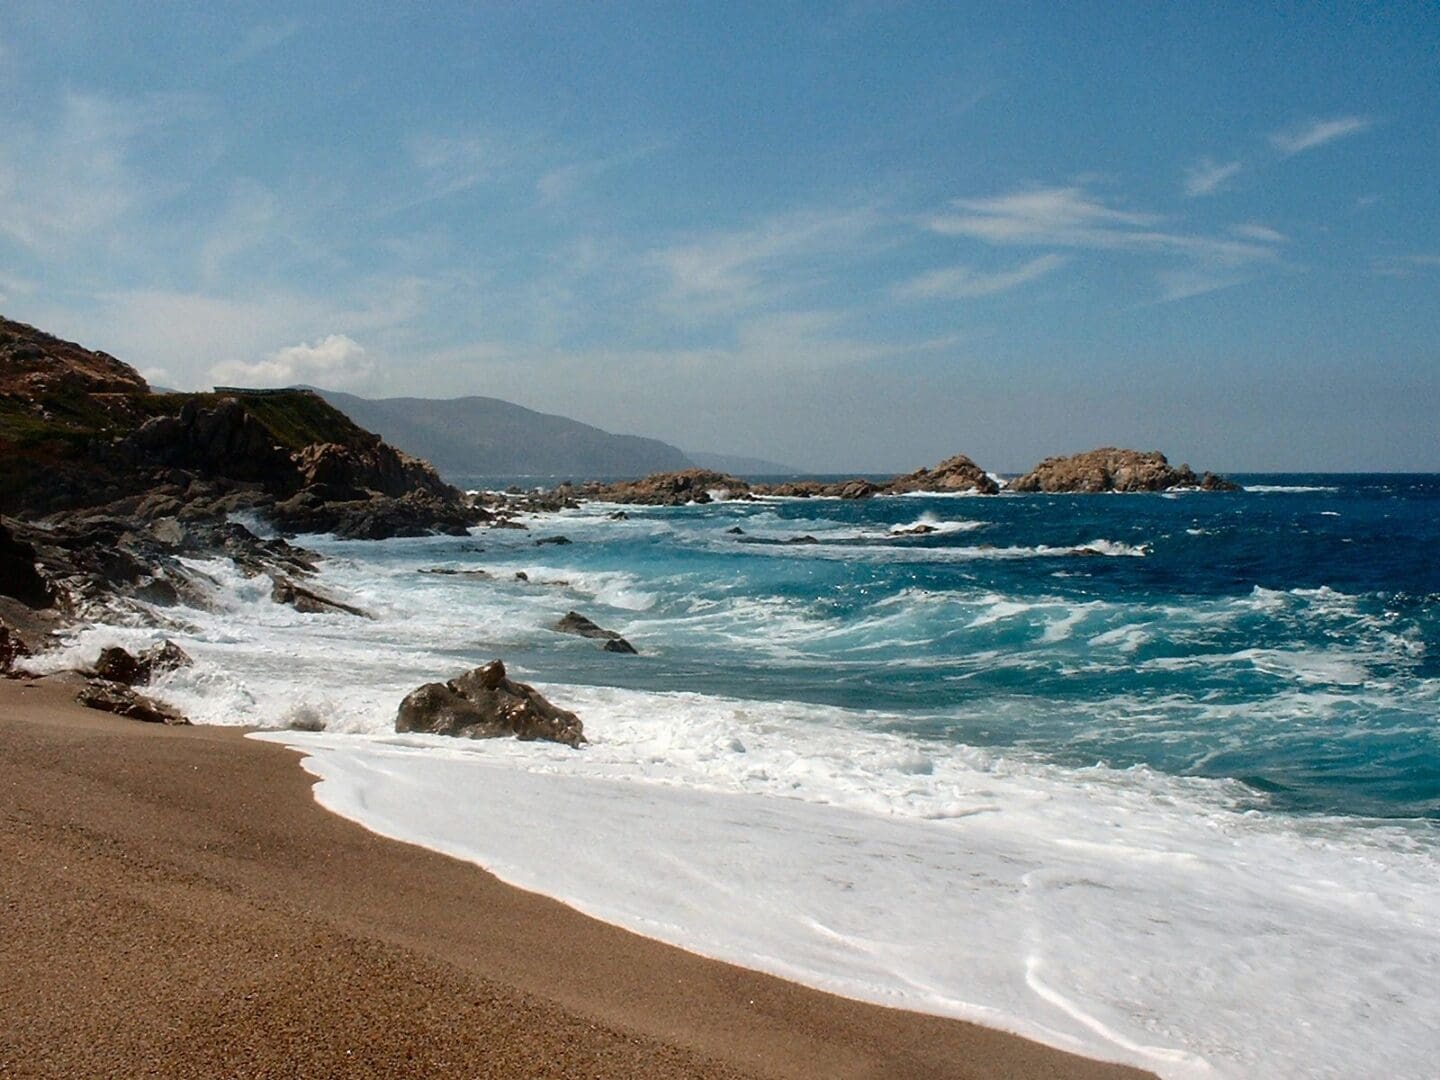 A beach with waves crashing on it and rocks in the background.